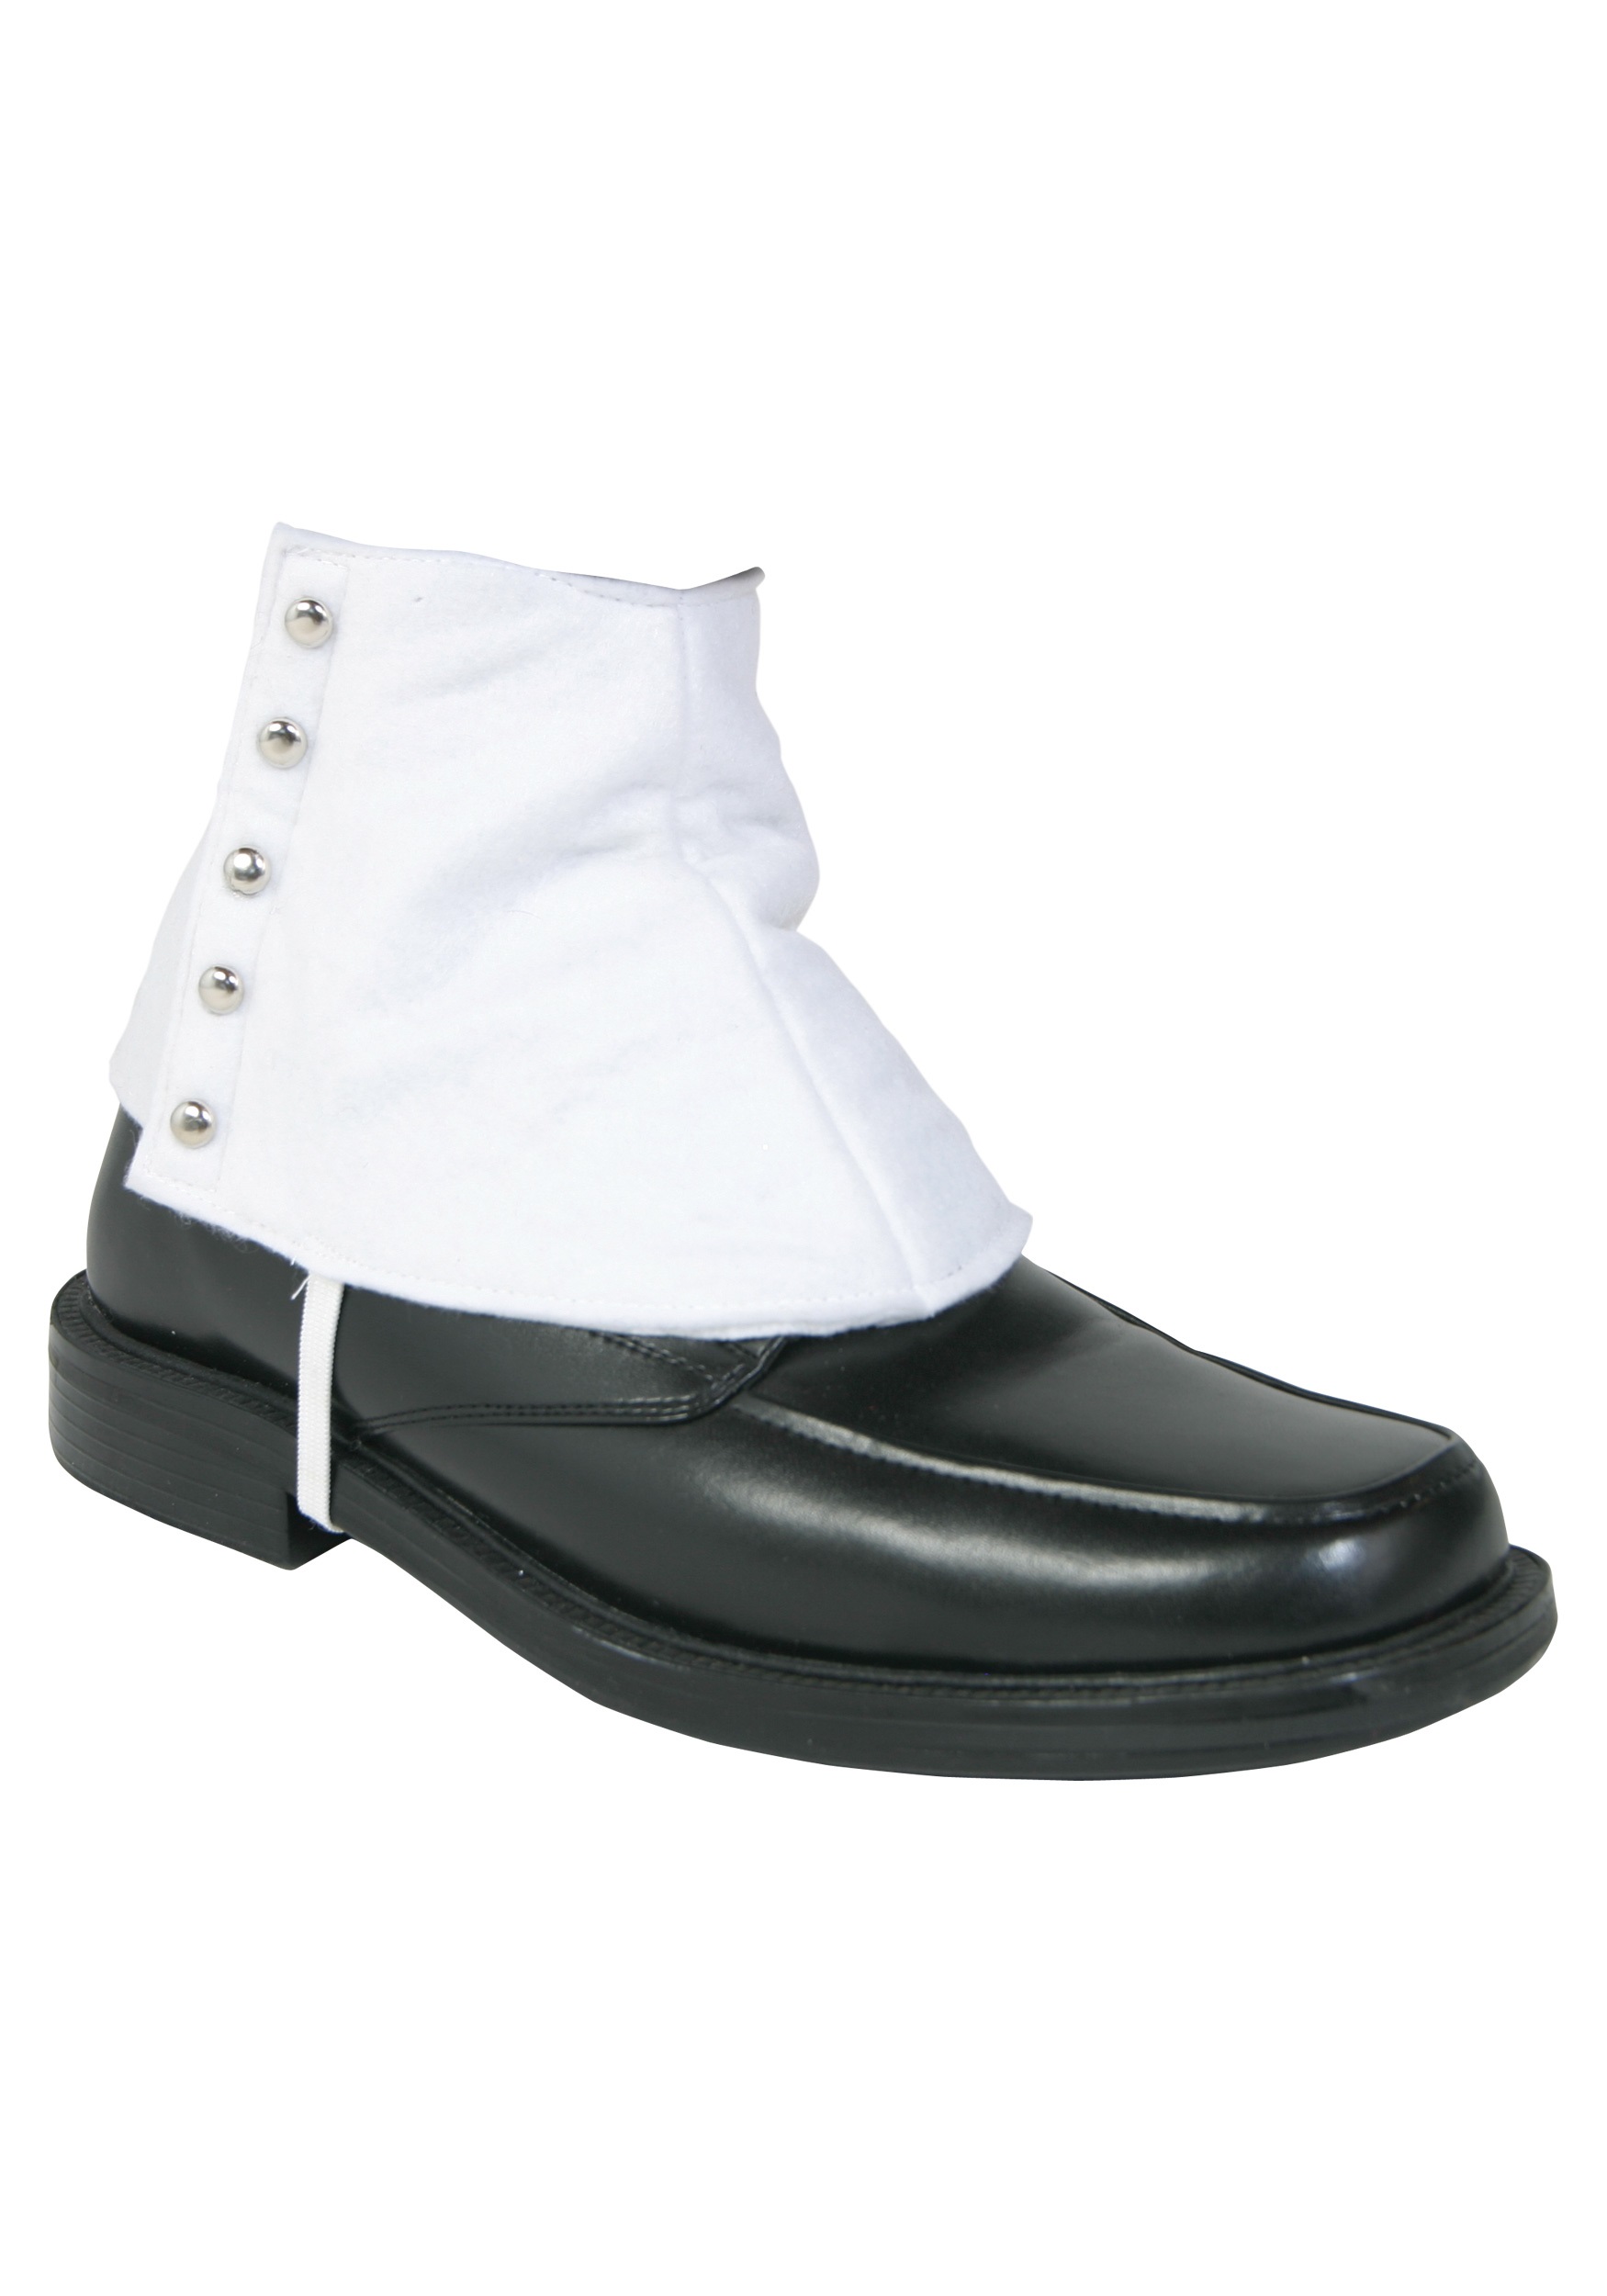 Gangster Costume Shoe Spats